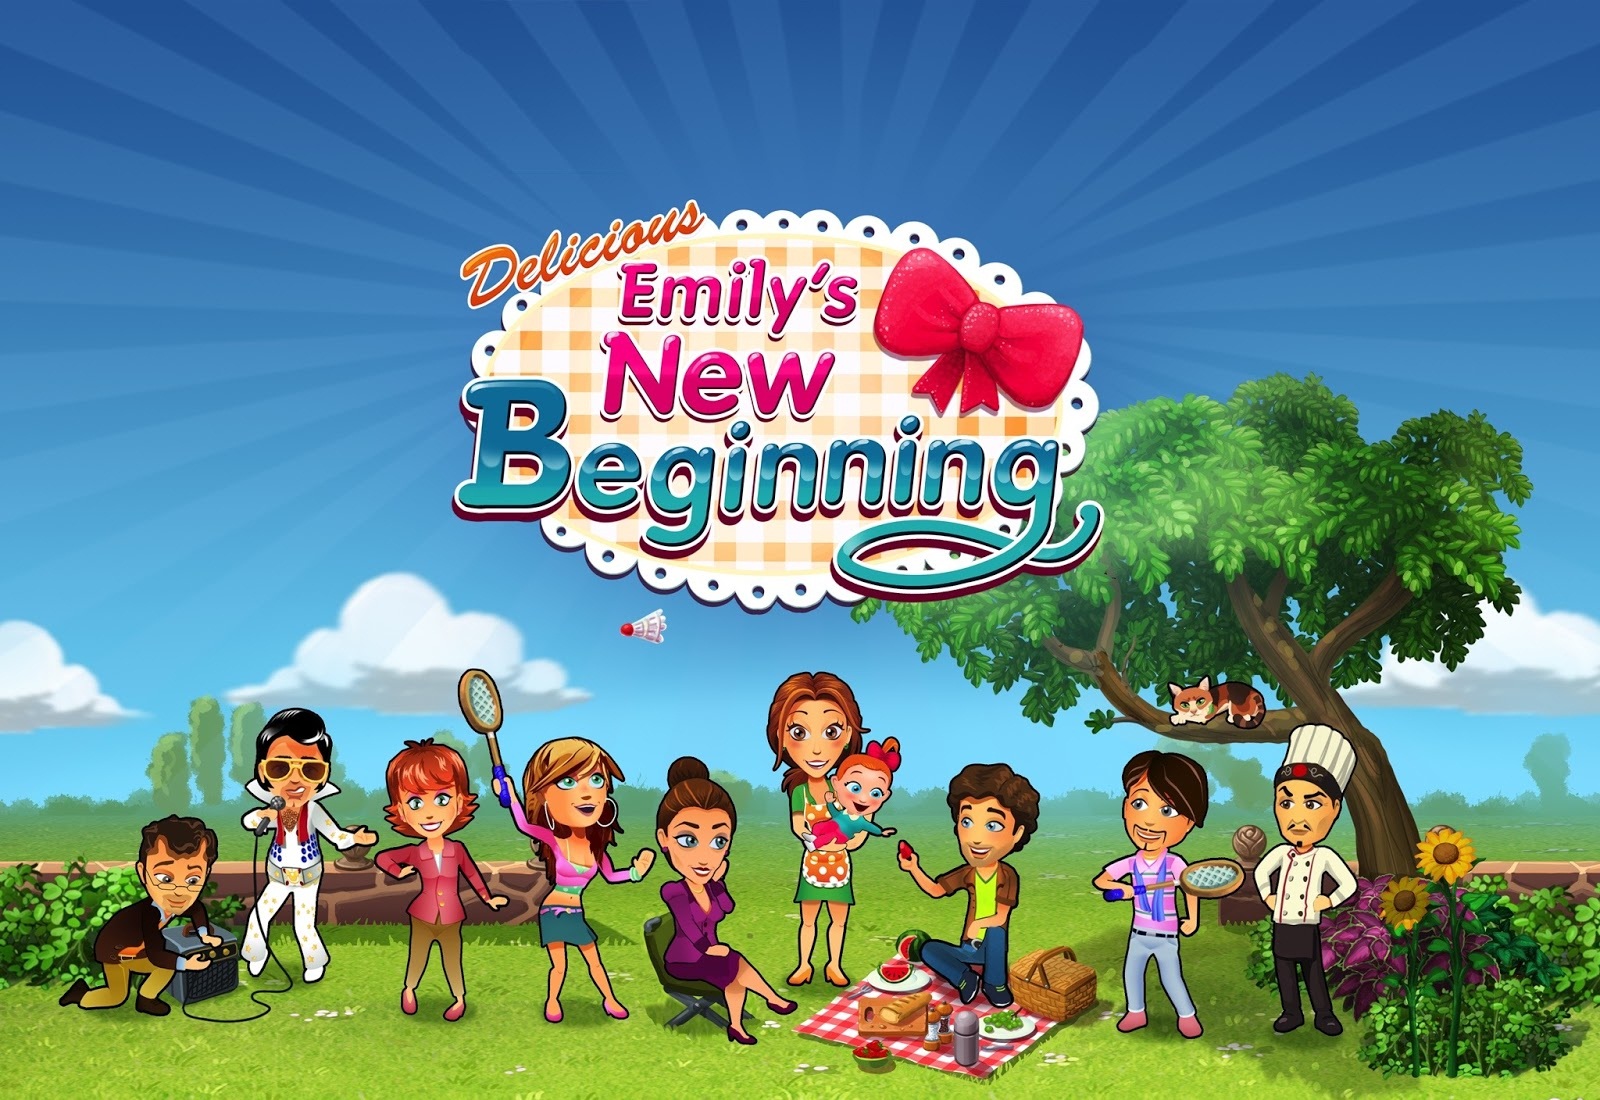 delicious emily games pack free download full version